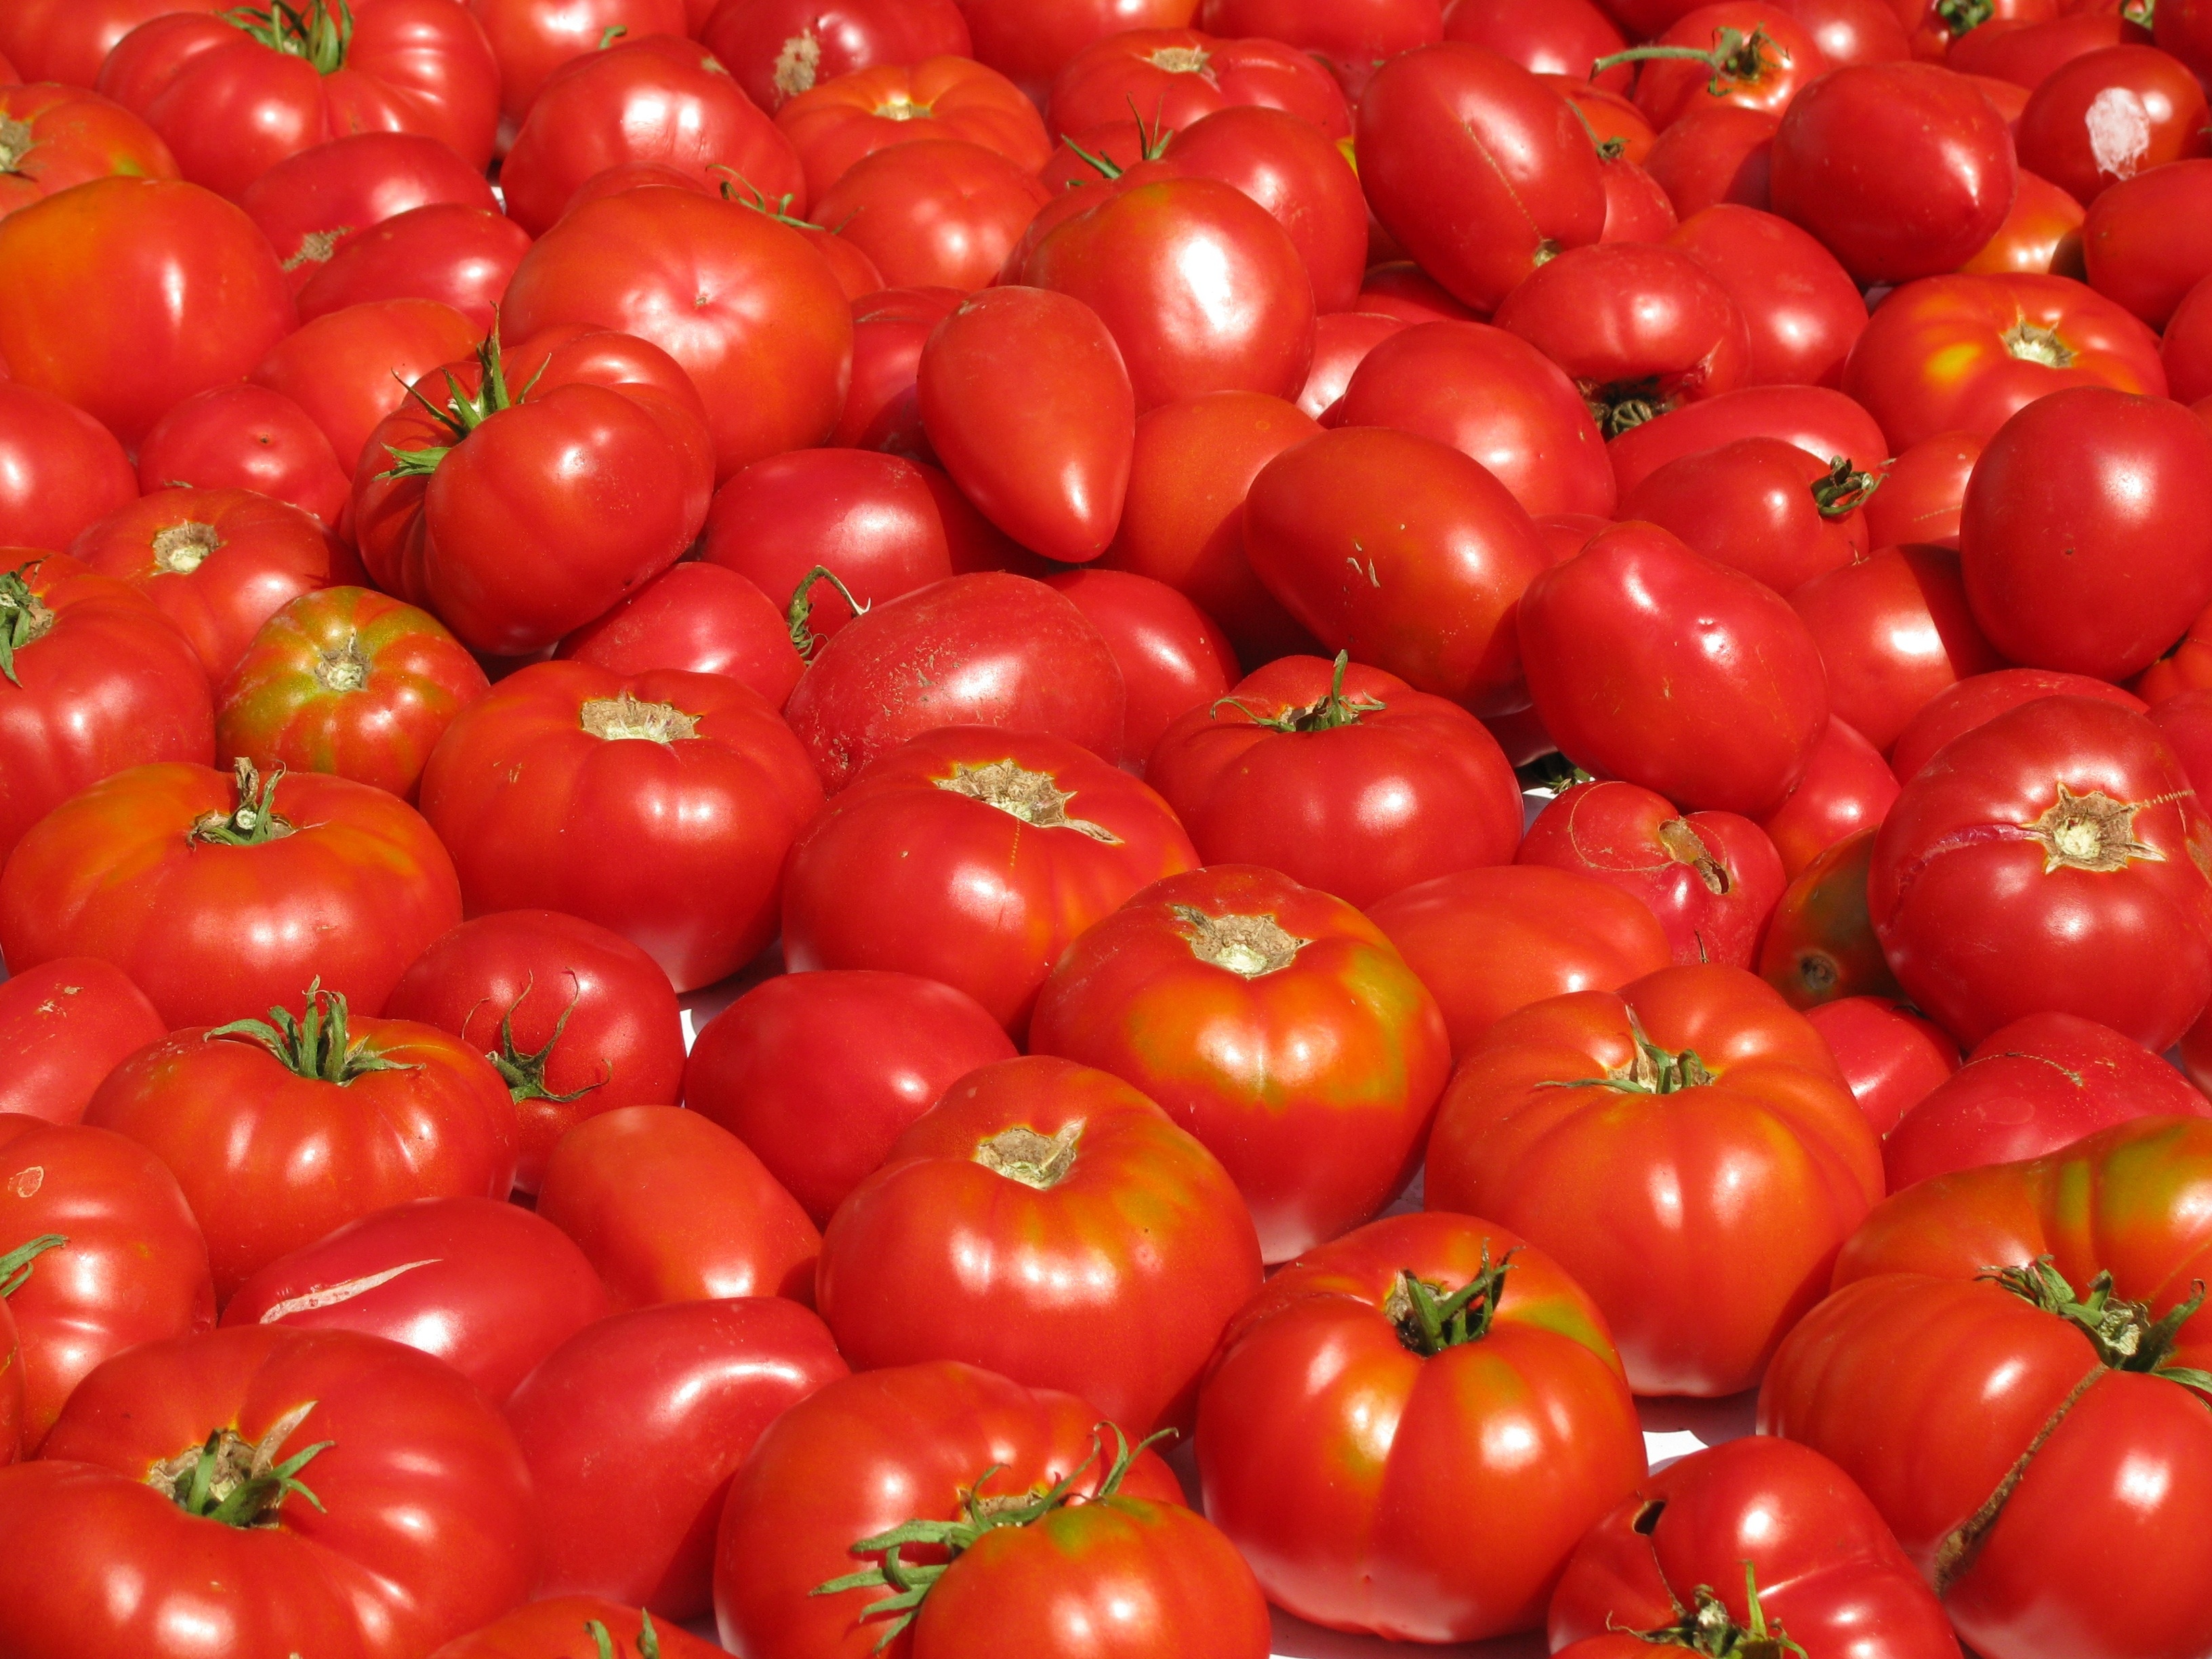 lot of red tomatoes